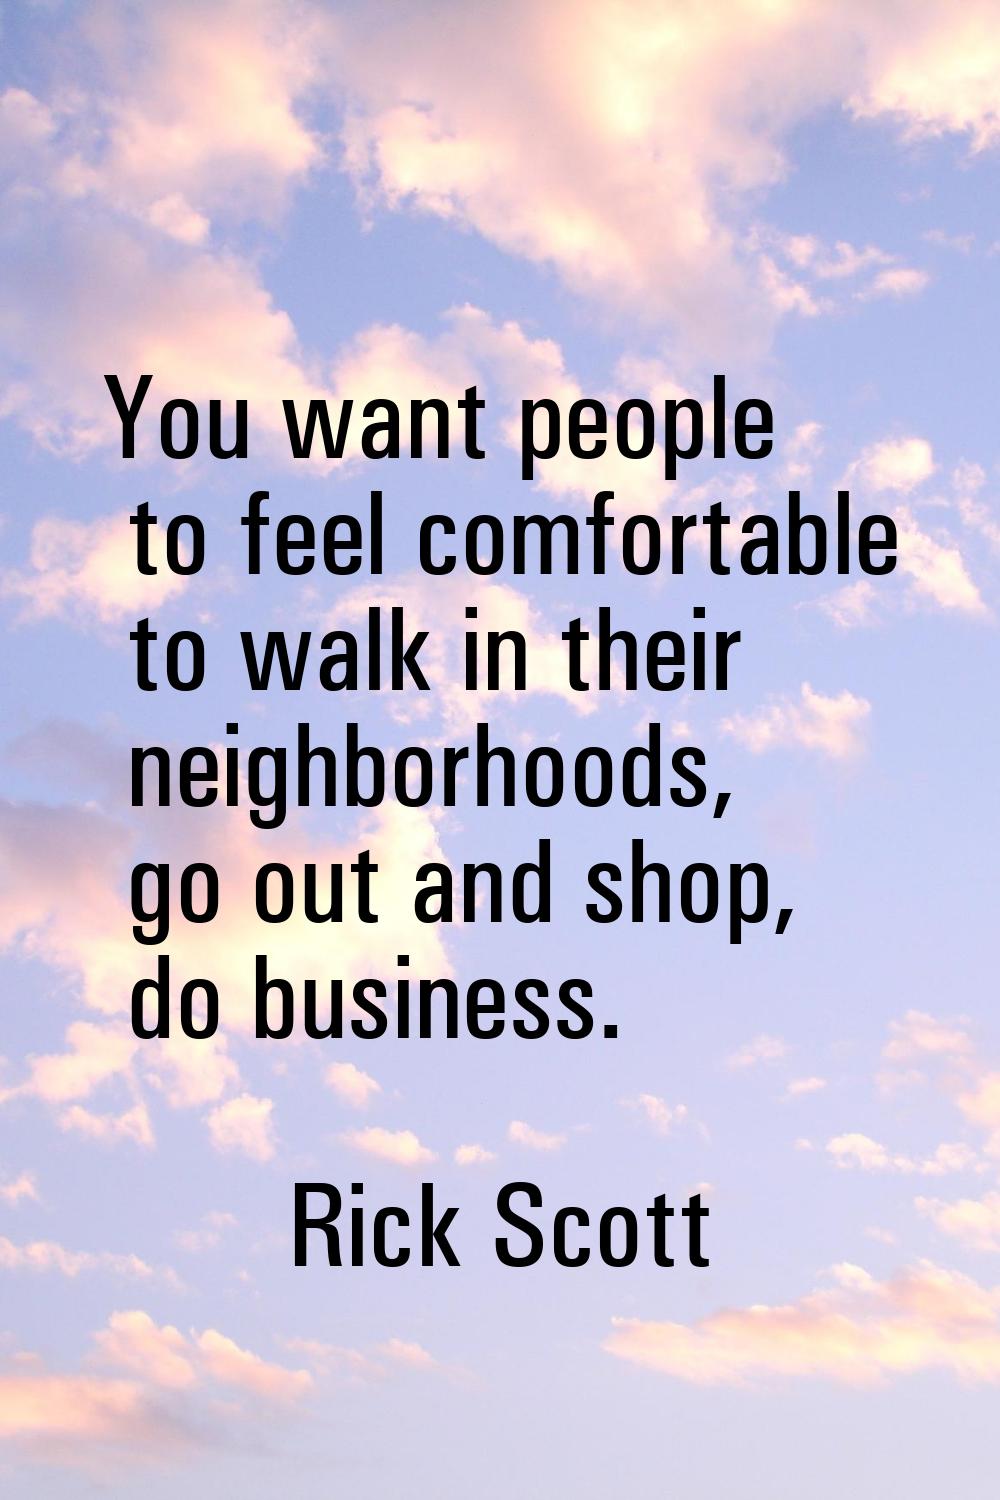 You want people to feel comfortable to walk in their neighborhoods, go out and shop, do business.